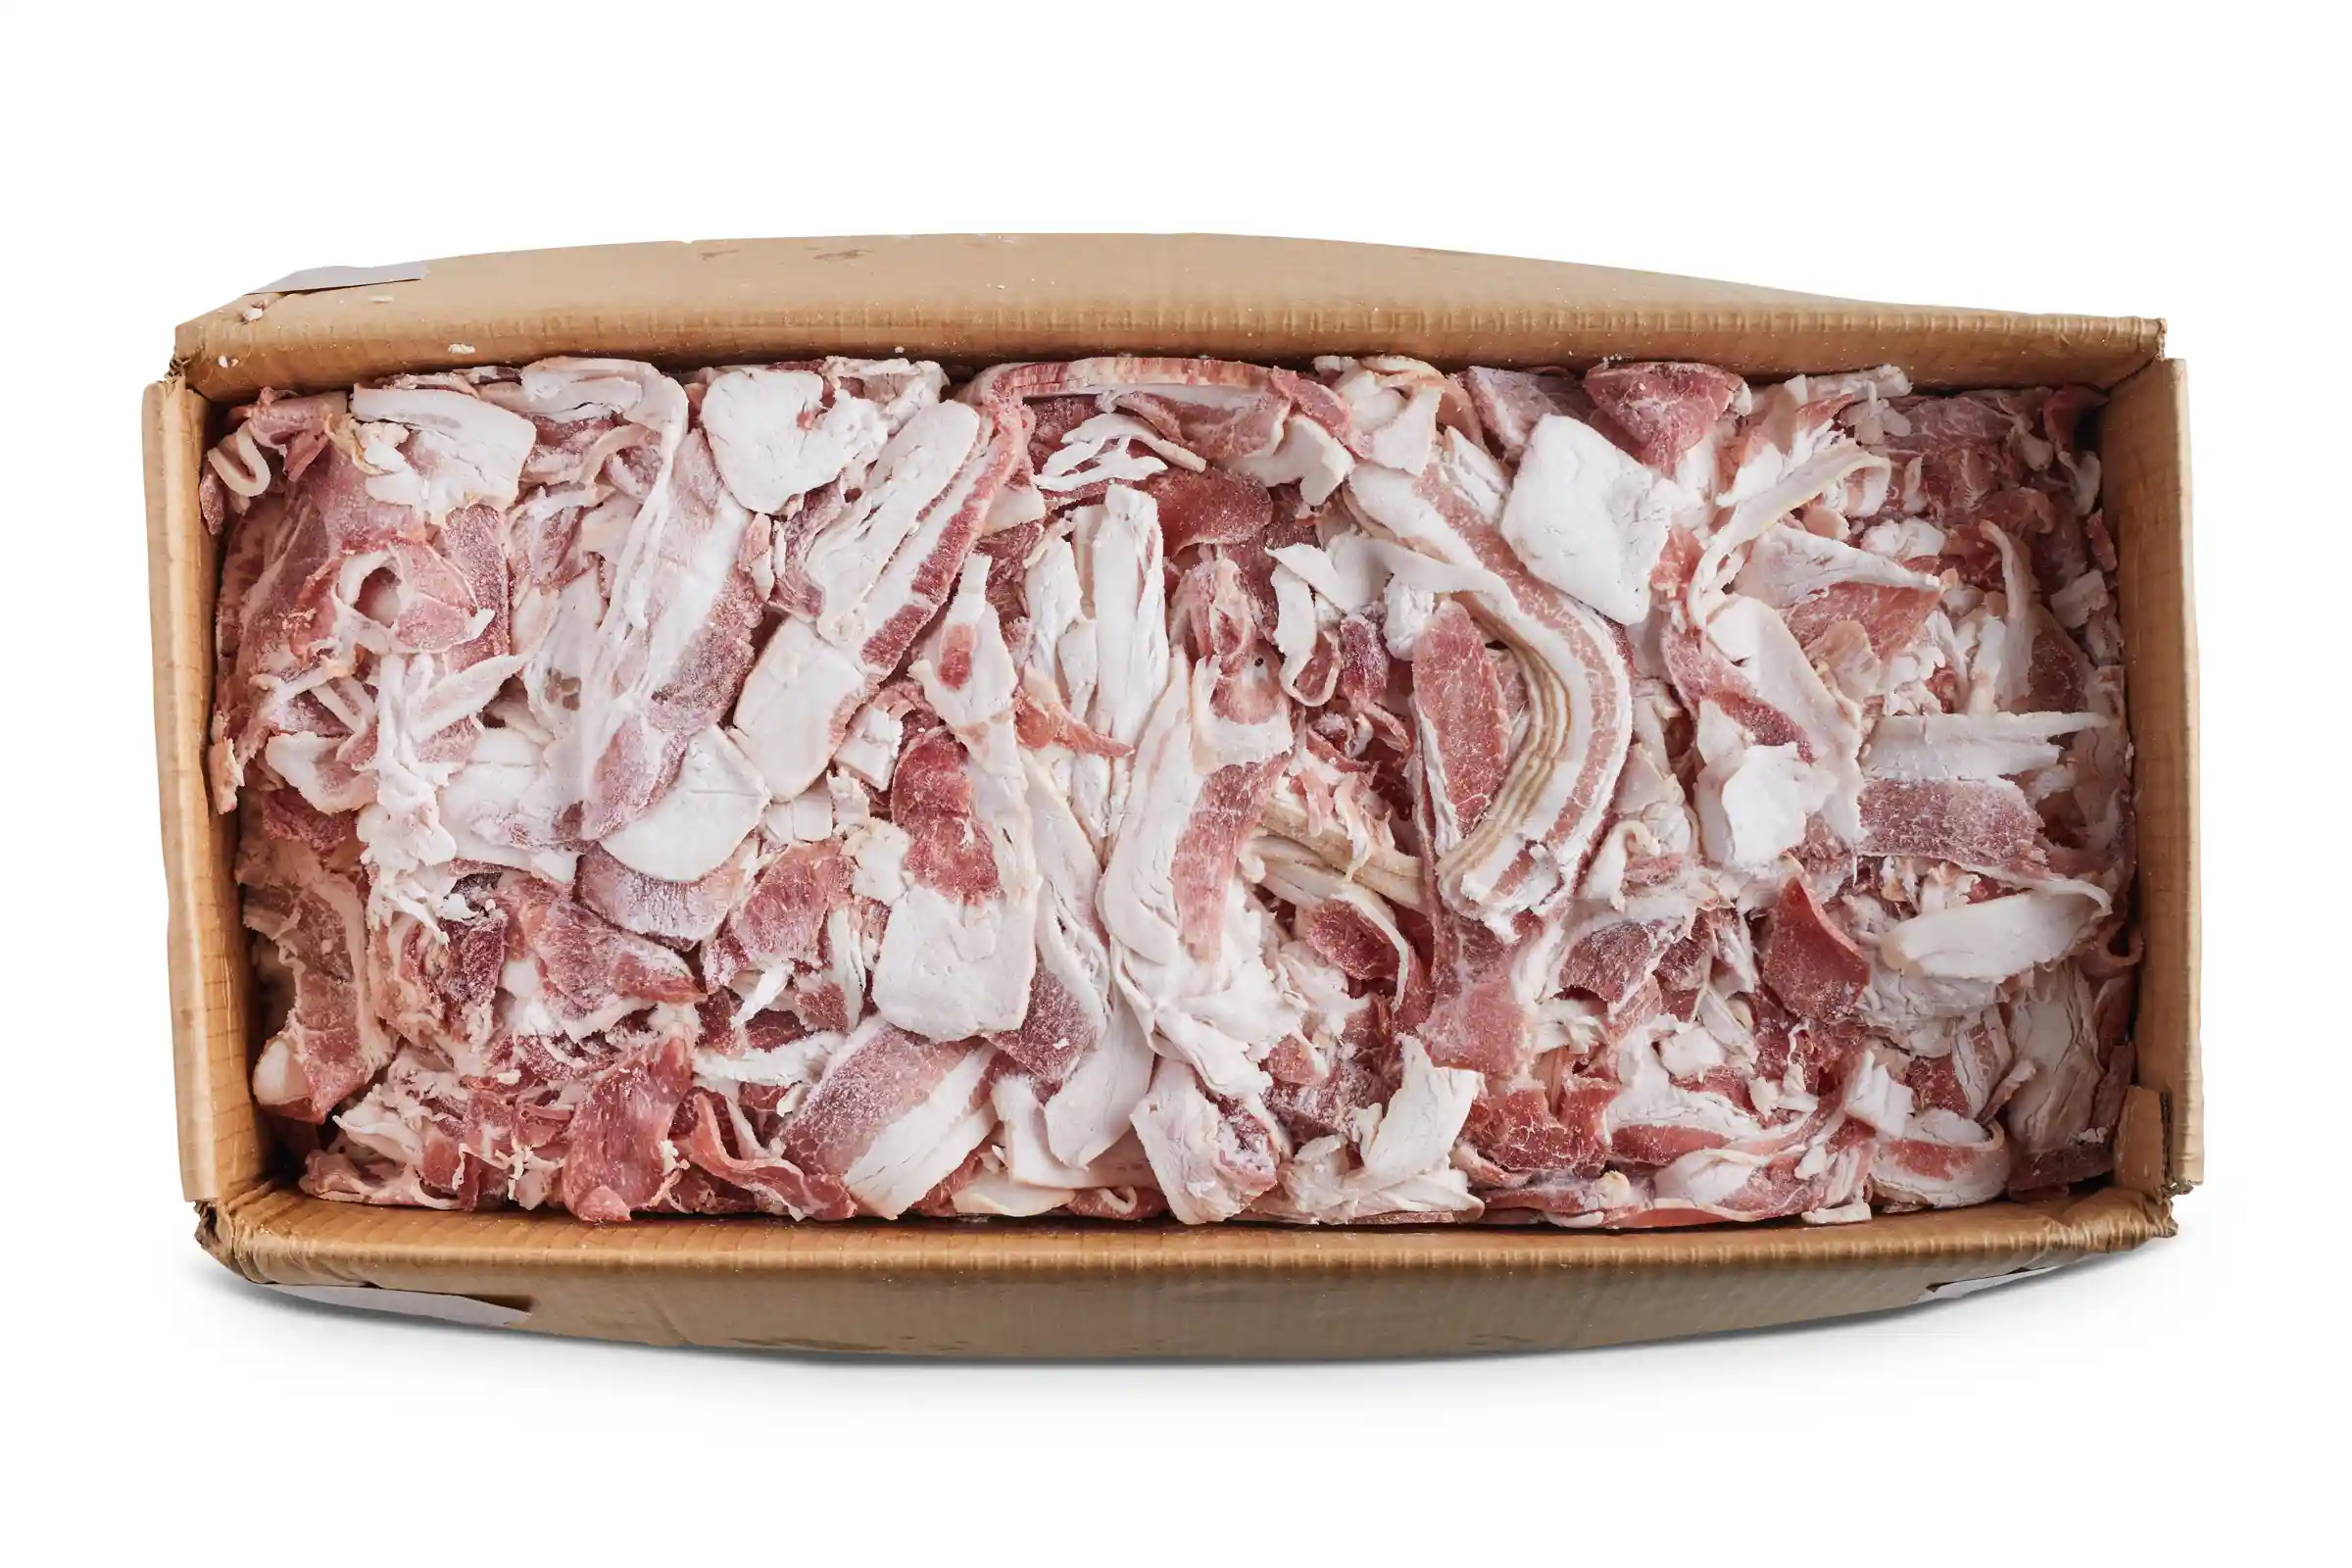 Wright® Brand Raw Smoked Bacon Ends and Pieces, 30 Lbs, Vacuum-sealed, Frozen_image_21